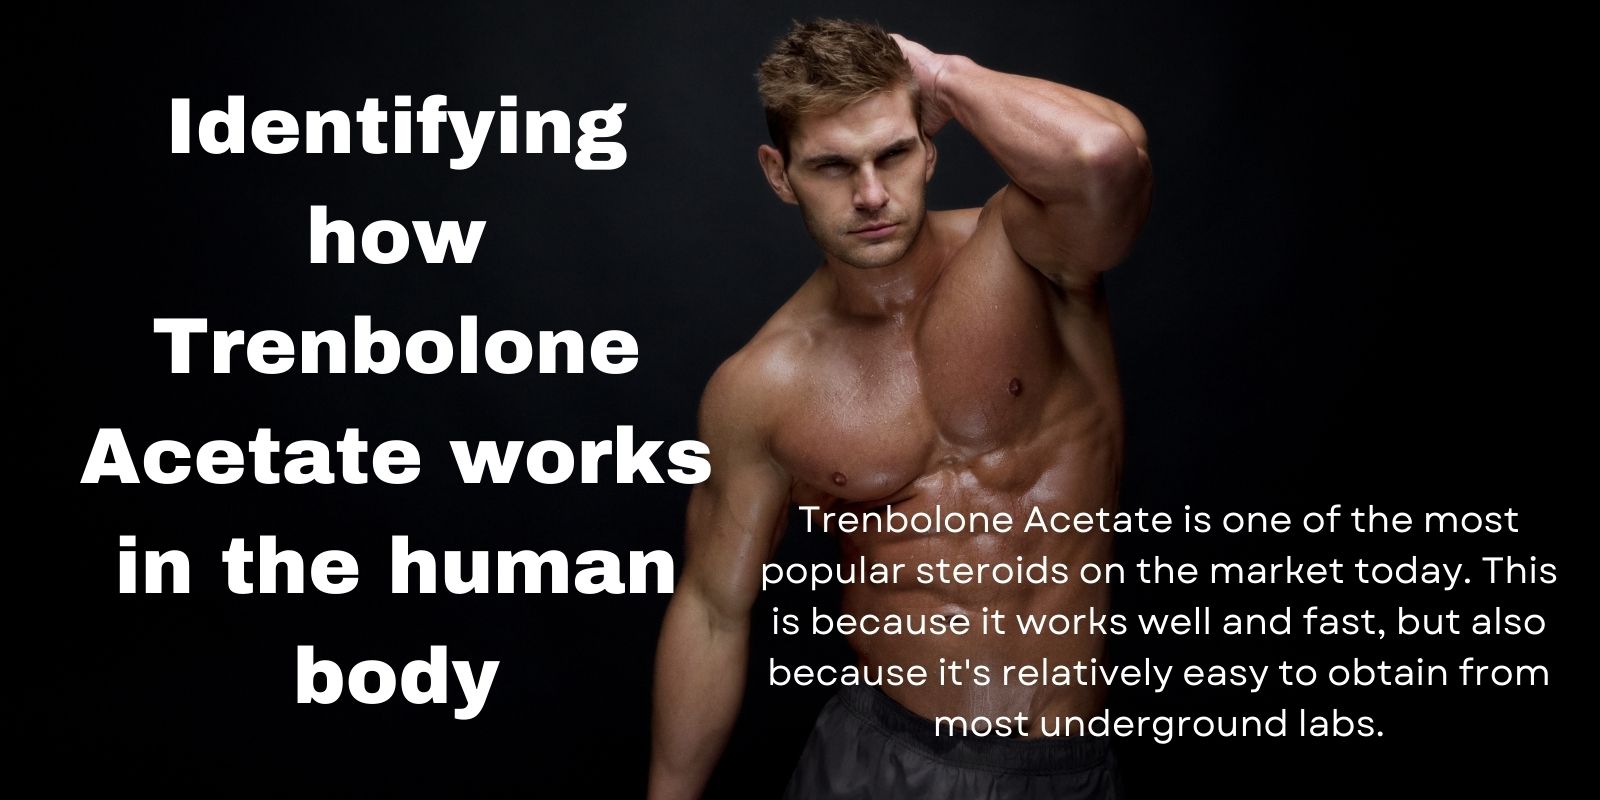 Identifying how Trenbolone Acetate works in the human body